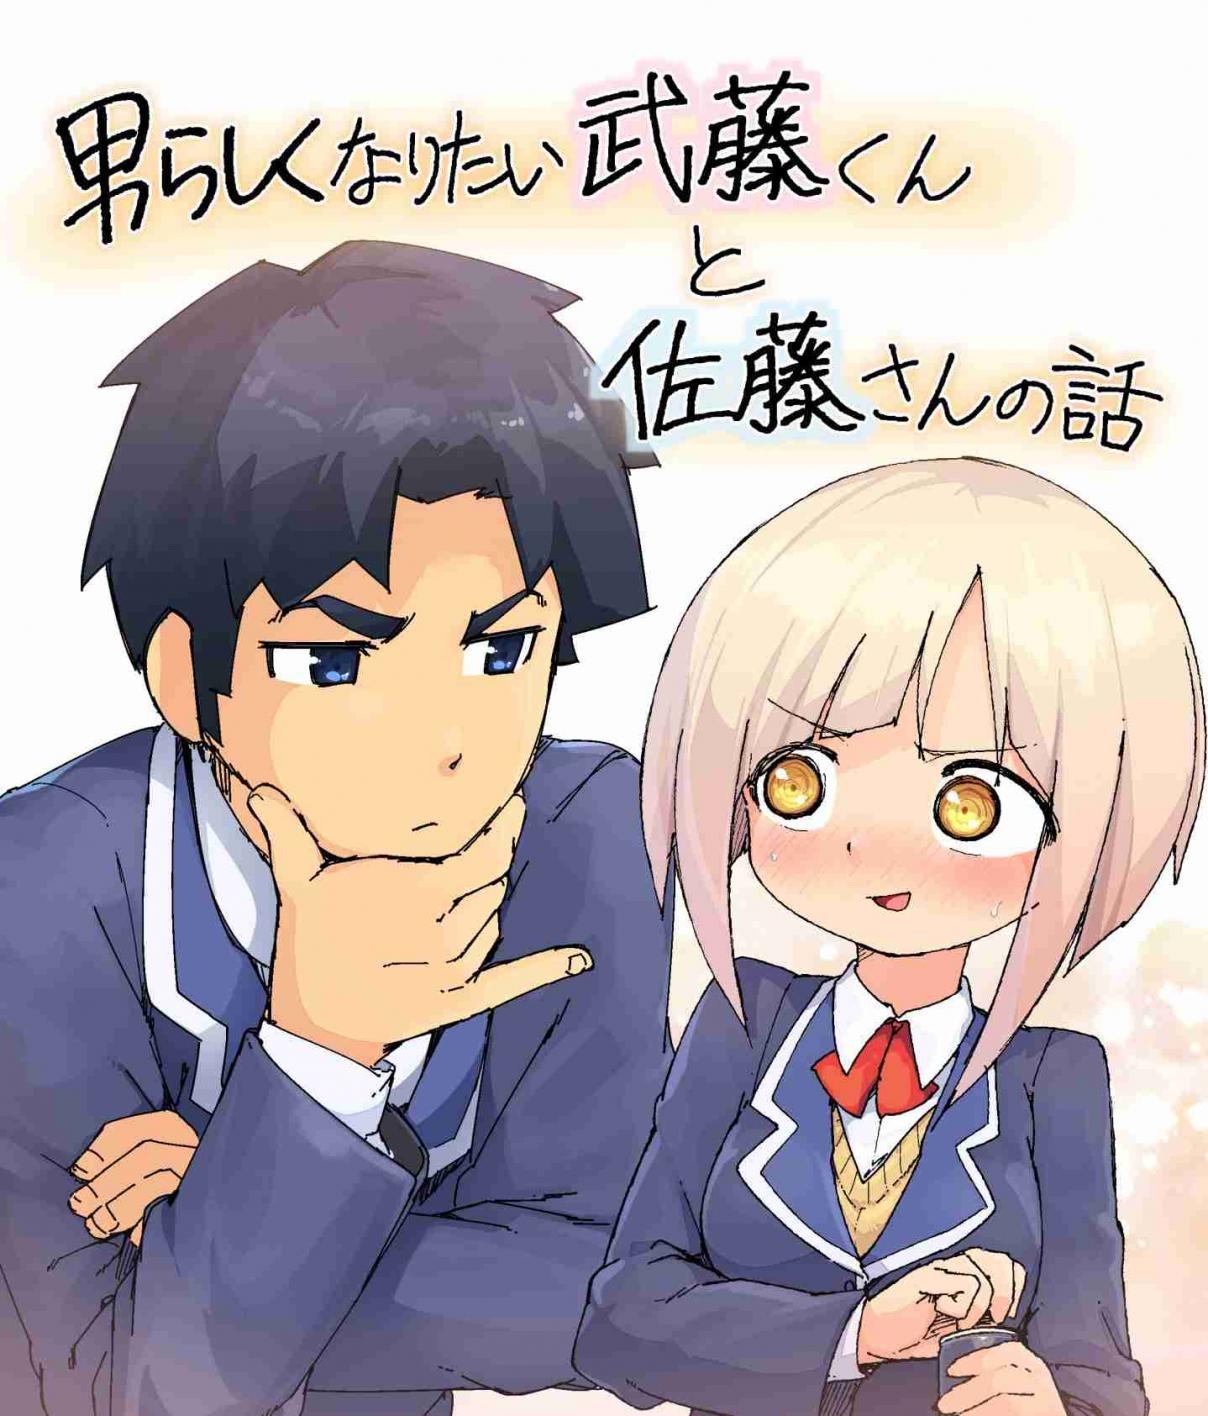 A Girl Who Unconsciously Acts Boyish Ch. 4 A story about Mutou kun, who wishes to become manlier, and Satou san